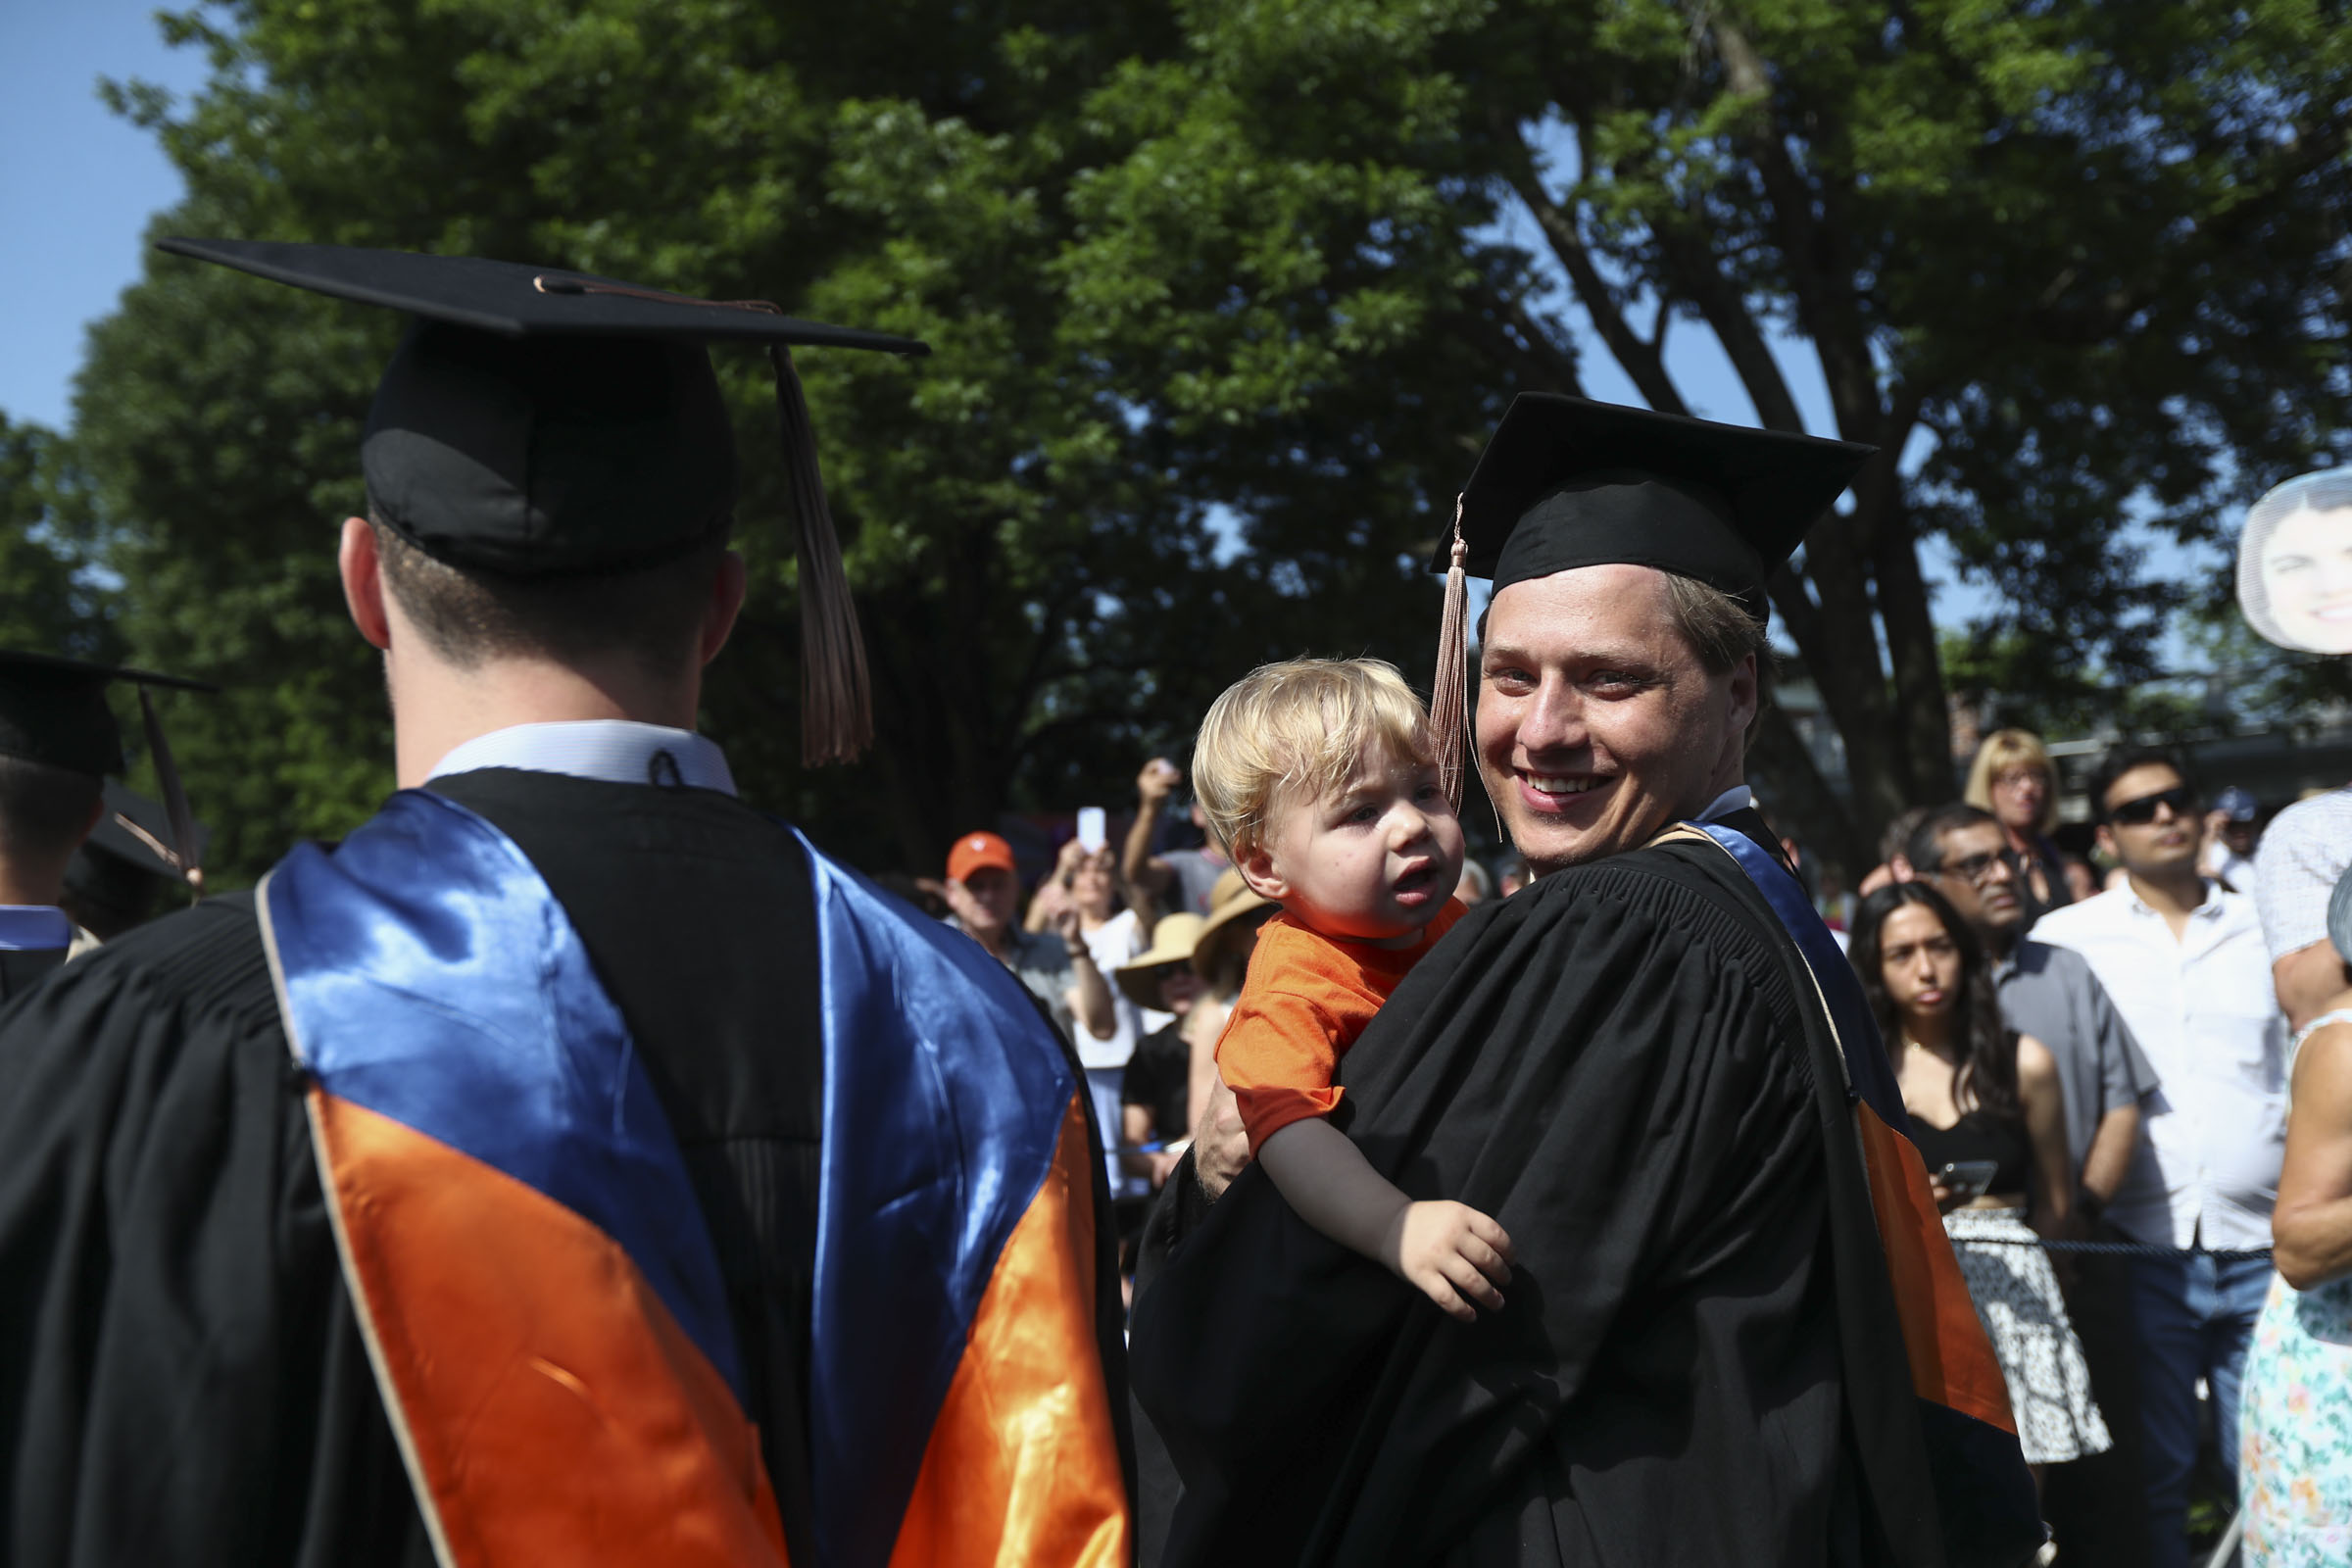 A student embraces a toddler as he and more than 4,500 of his classmates make their way down the Lawn.